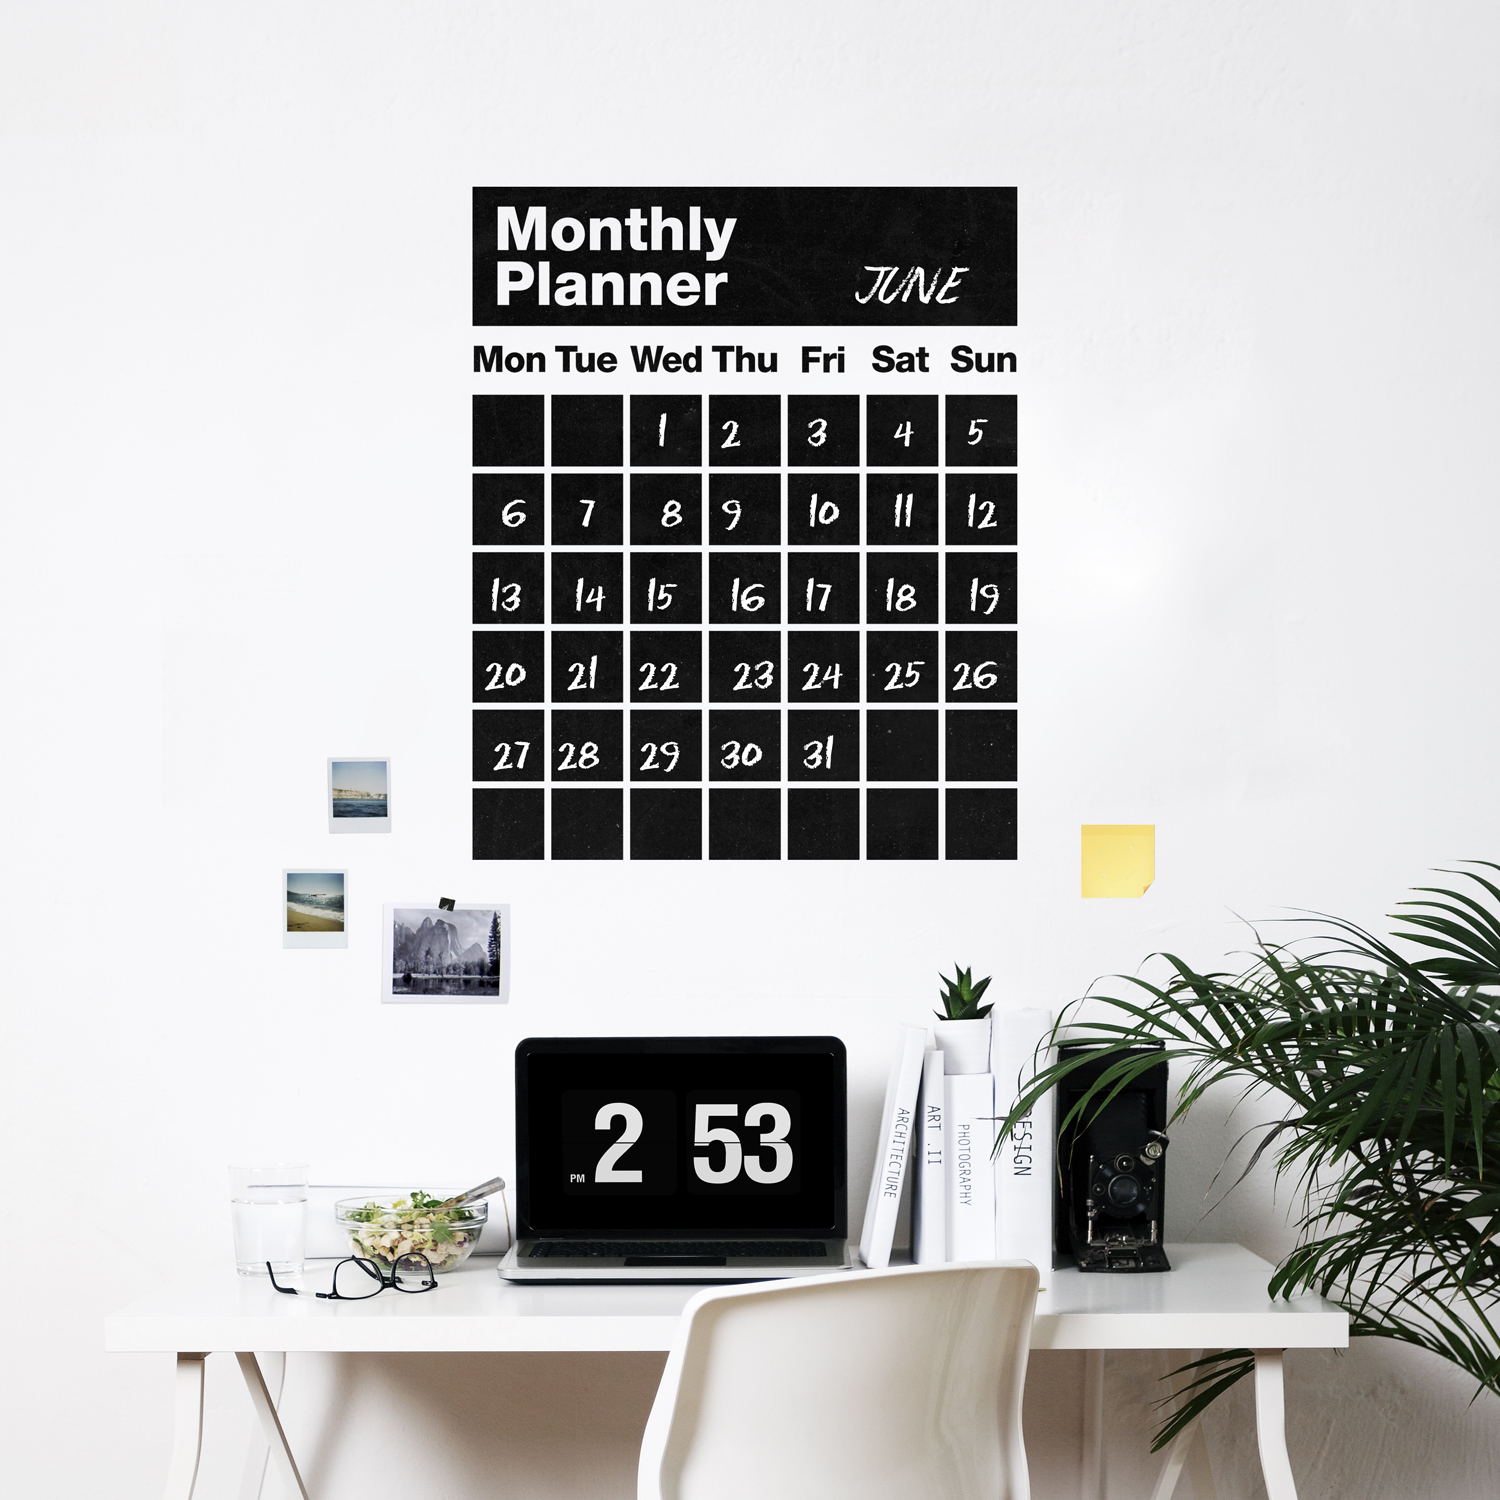 Lavagna adesiva – “Monthly Planner” – Oh!